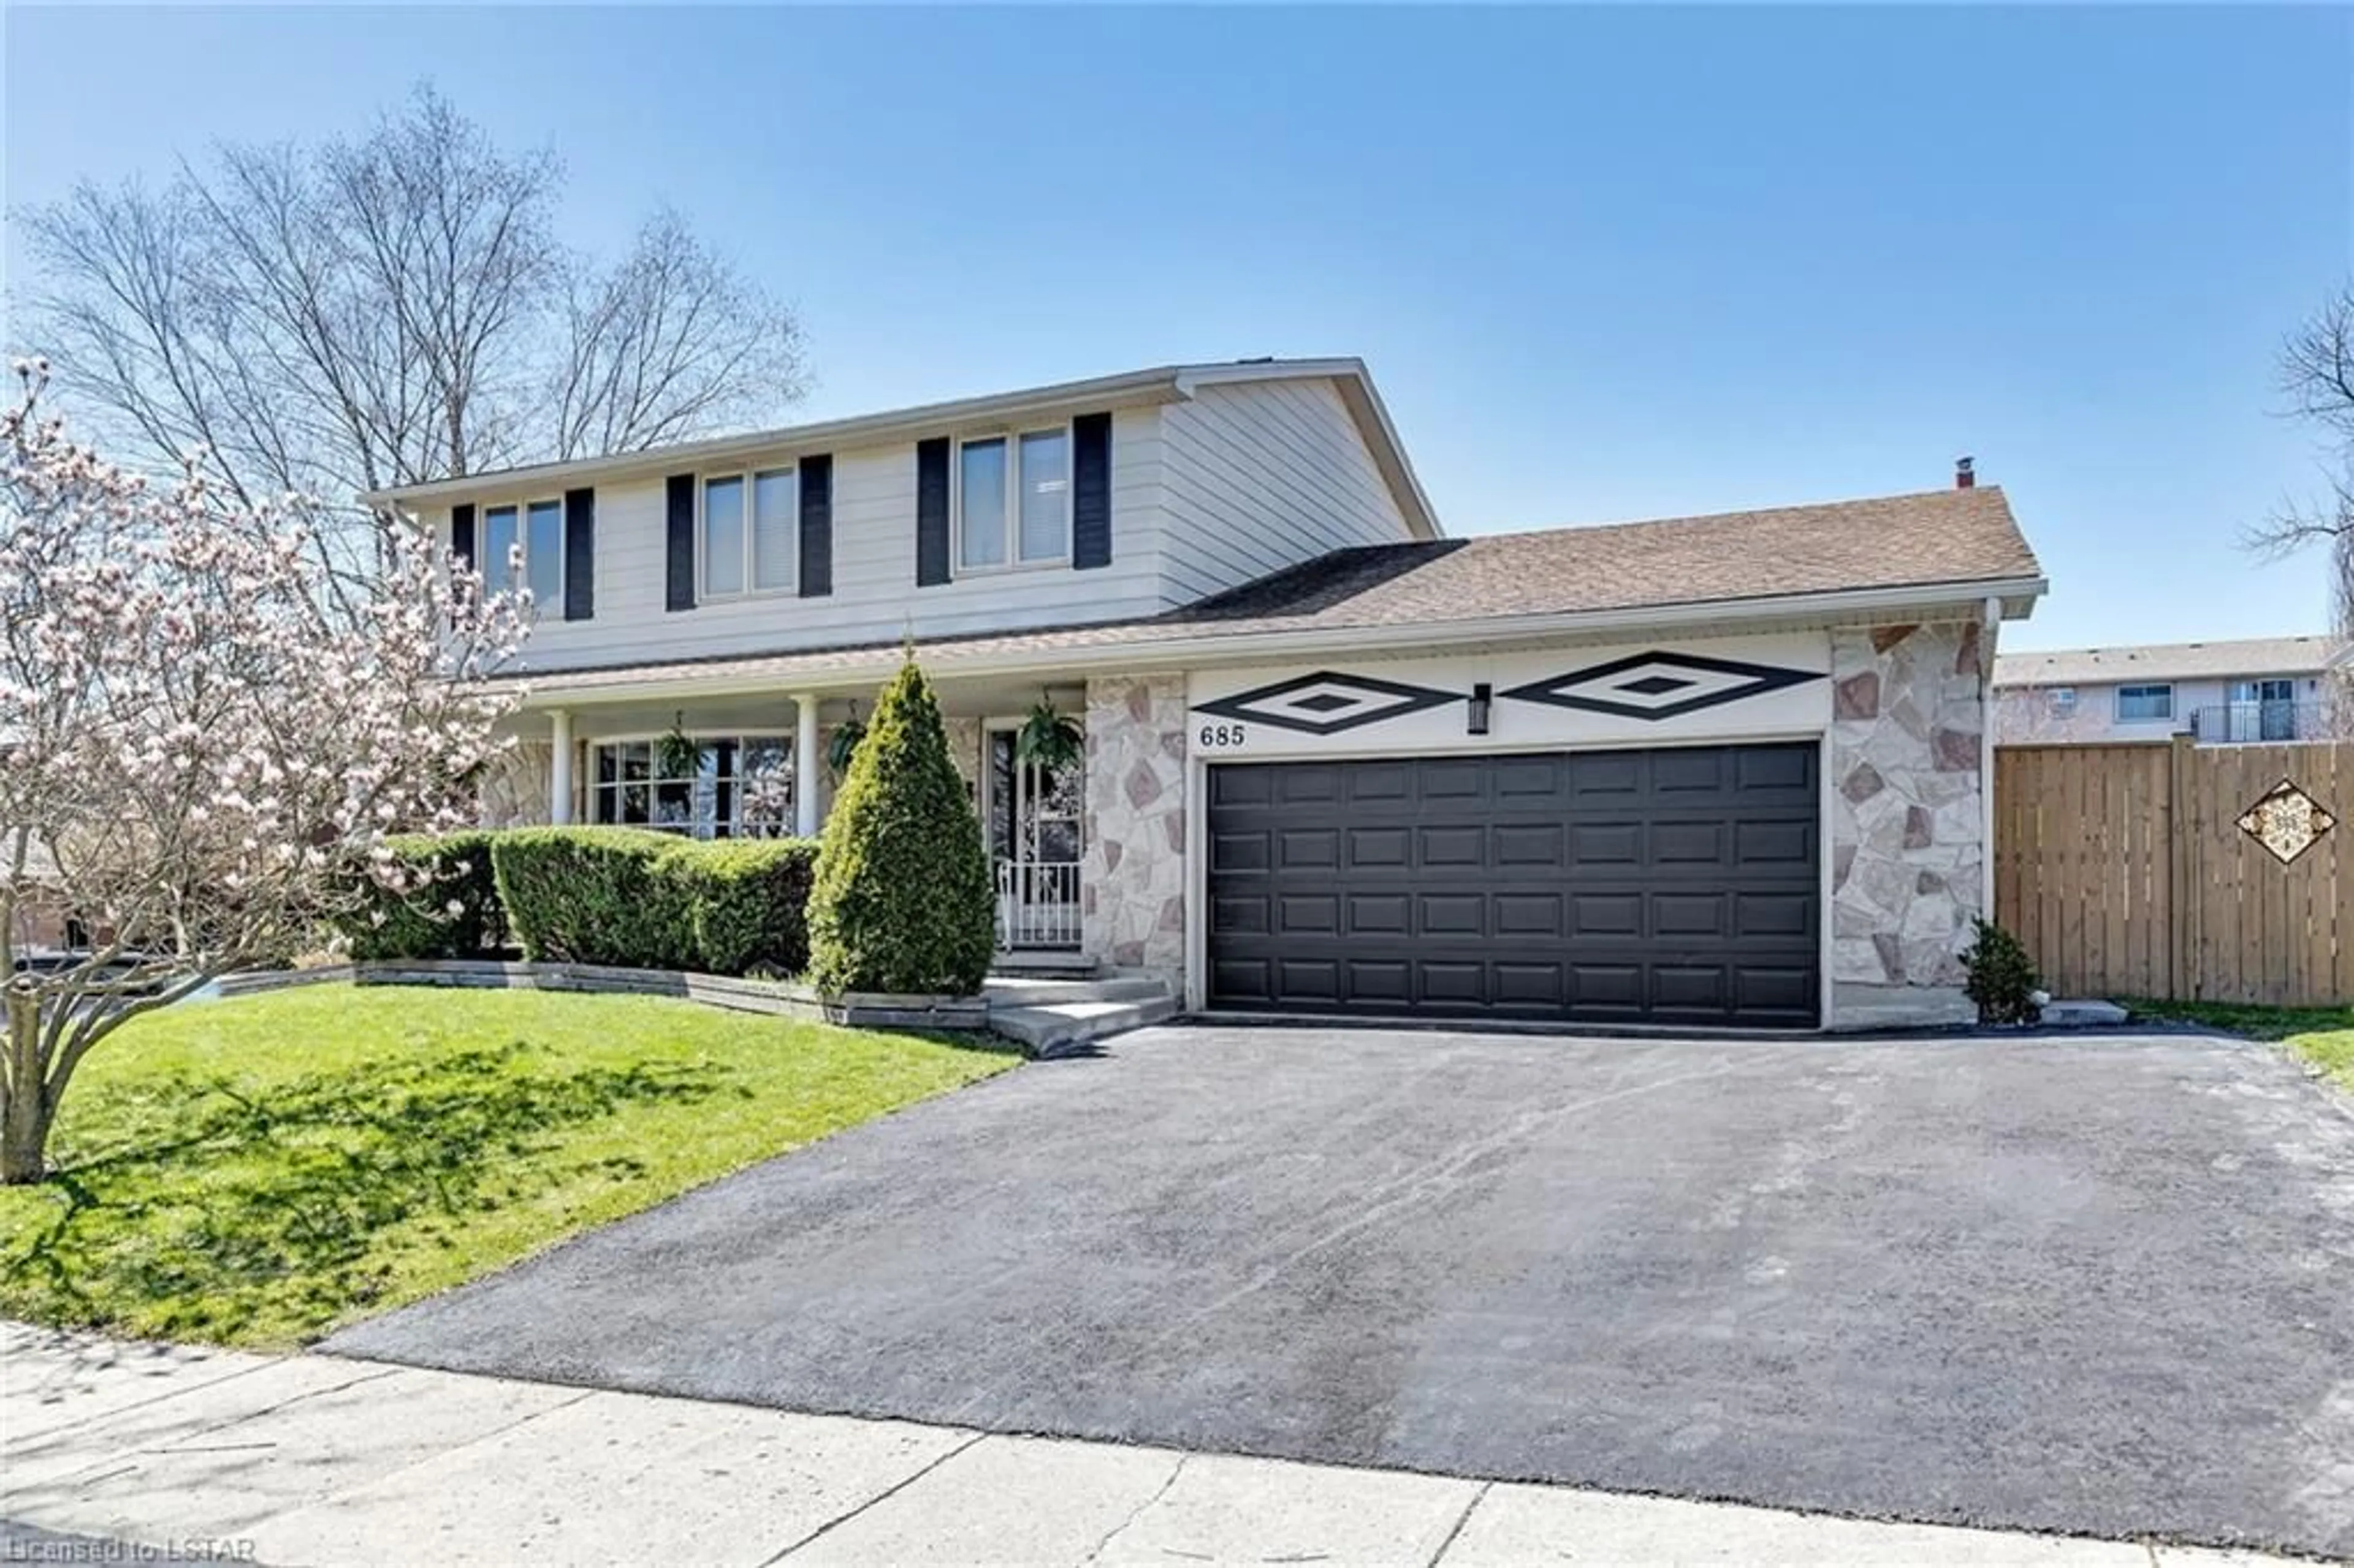 Frontside or backside of a home for 685 Cranbrook Rd, London Ontario N6K 1W8